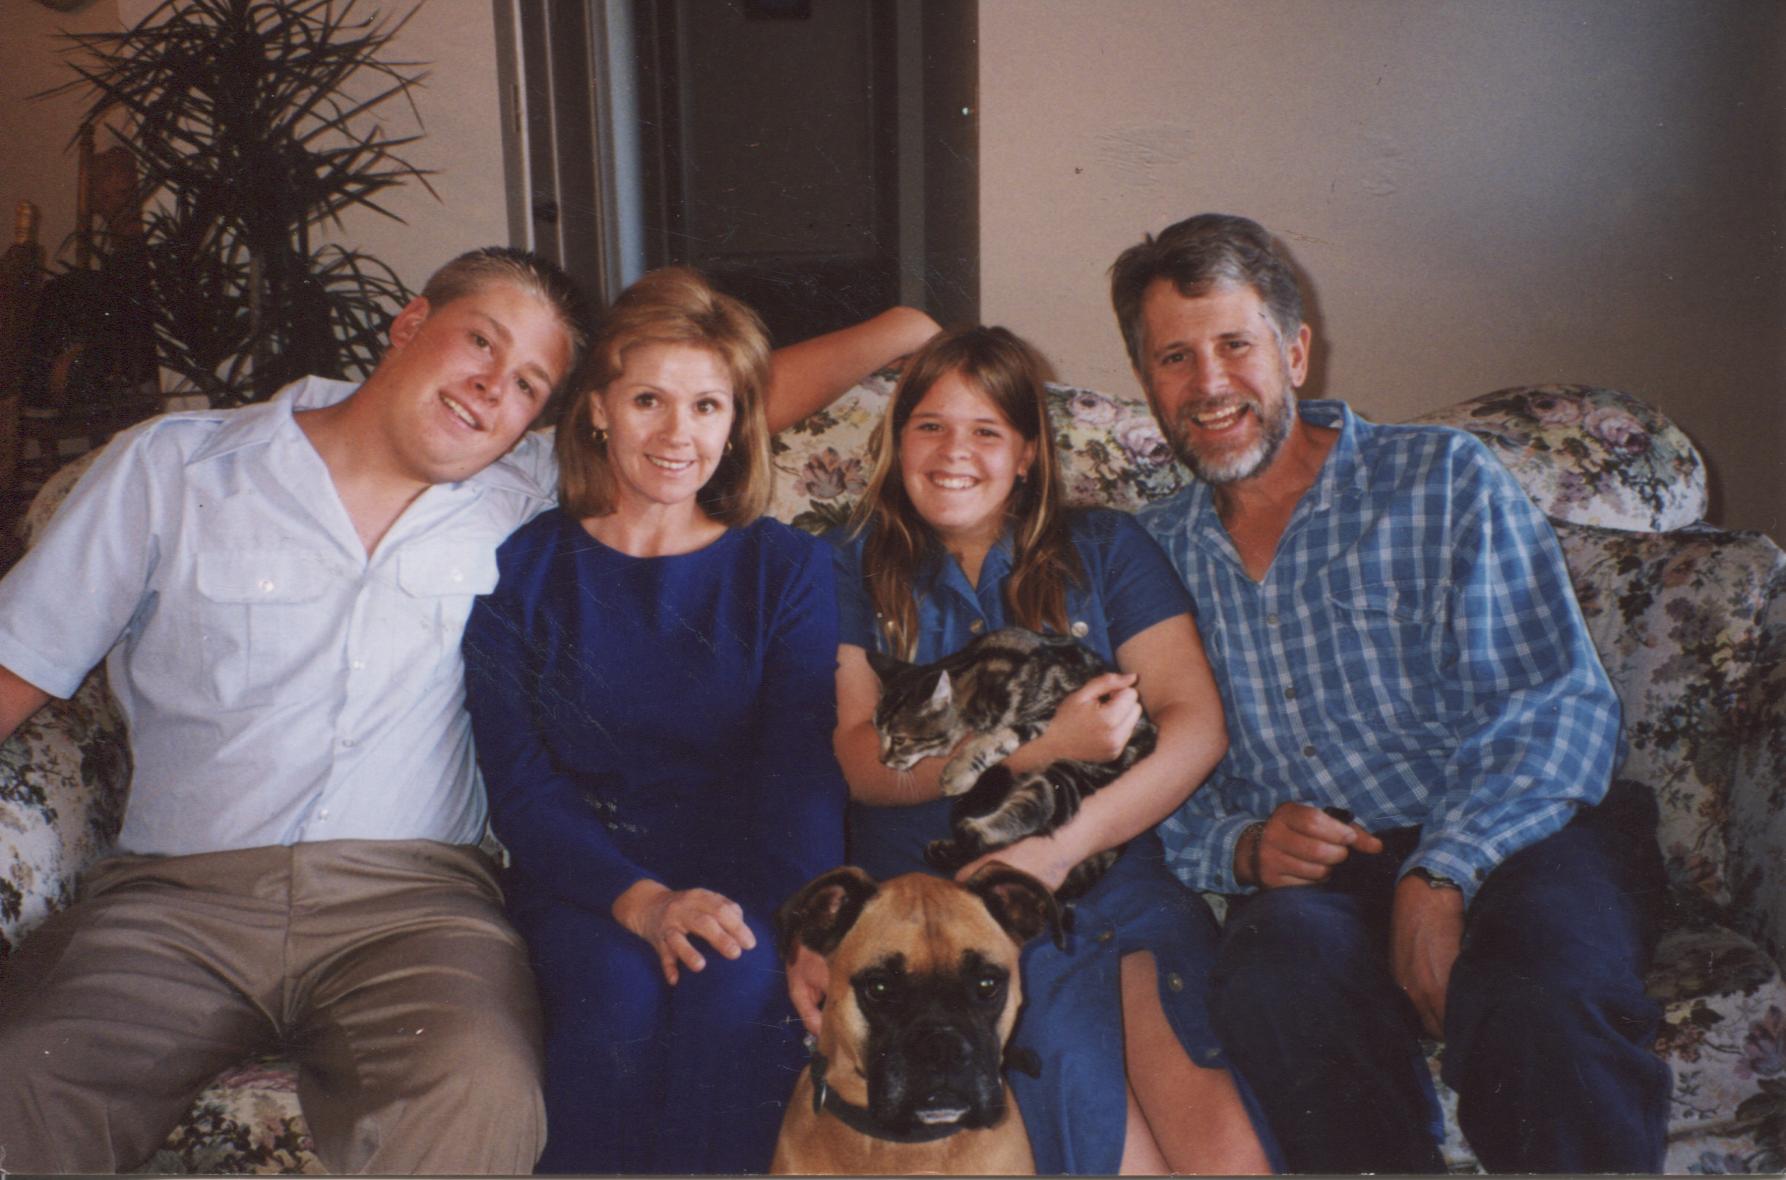 PHOTO: Kayla Mueller's family from left to right: brother Eric, mother Marsha, Kayla, father Carl.